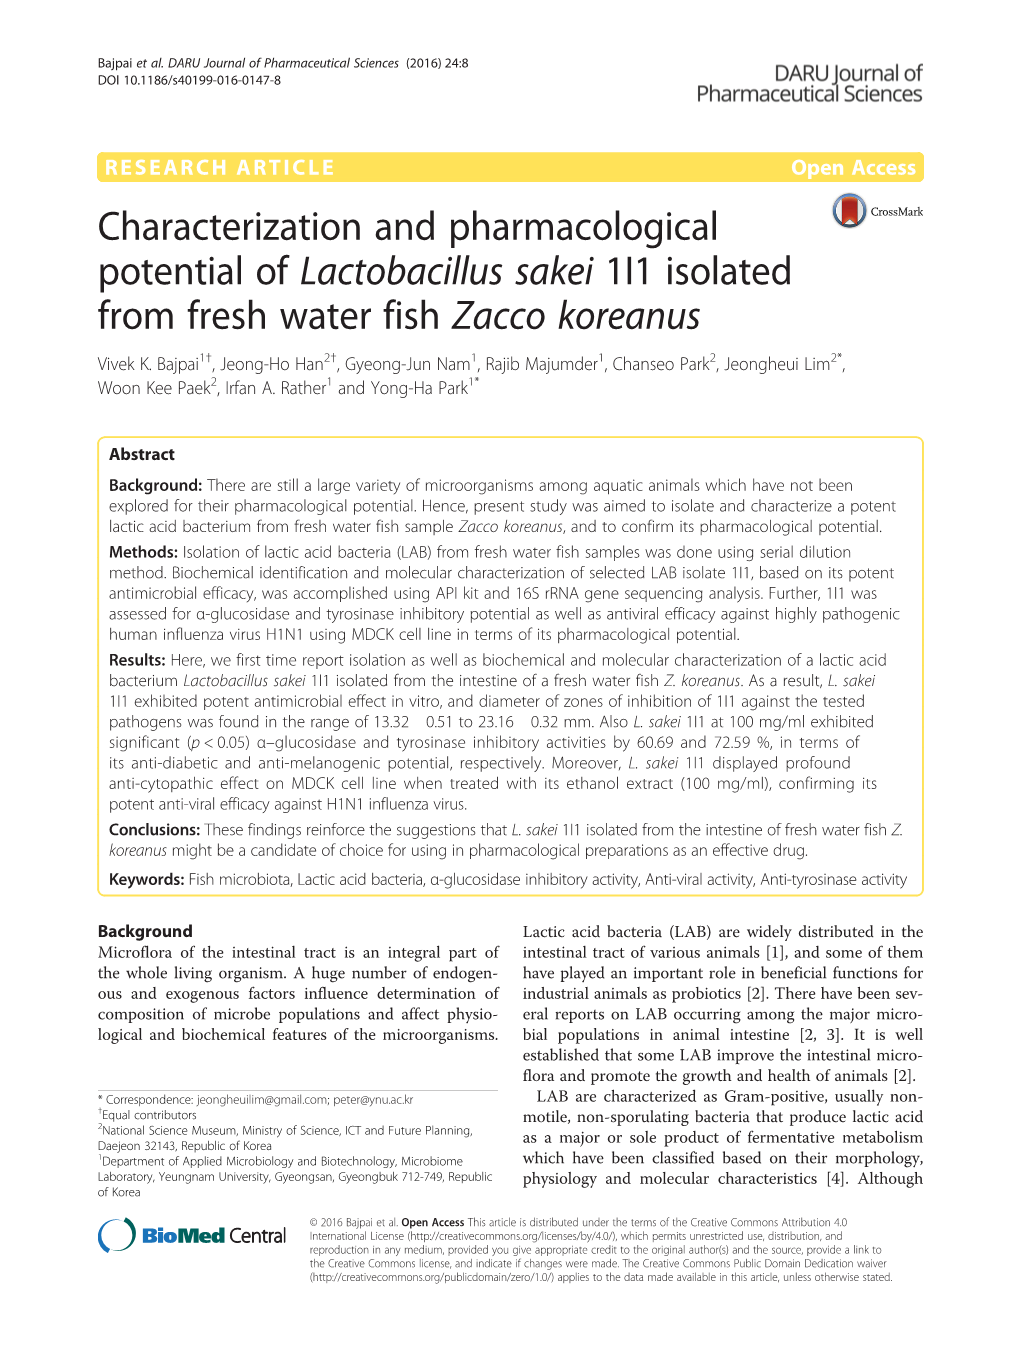 Characterization and Pharmacological Potential of Lactobacillus Sakei 1I1 Isolated from Fresh Water Fish Zacco Koreanus Vivek K